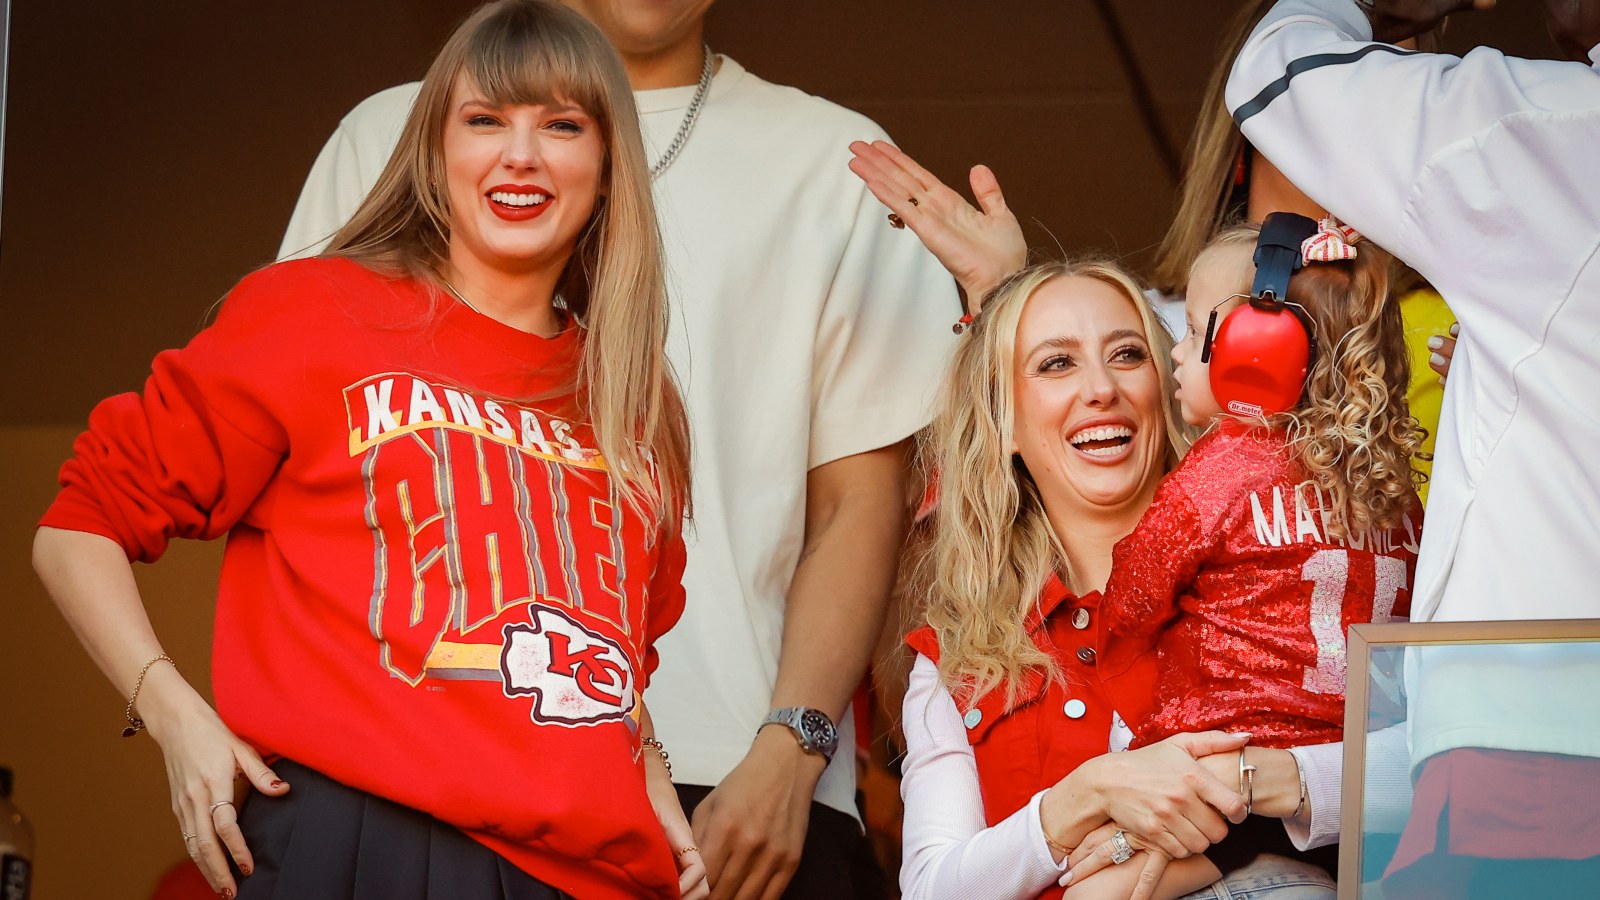 Taylor Swift’s Instagram Debut With Brittany Mahomes Sparks Excitement